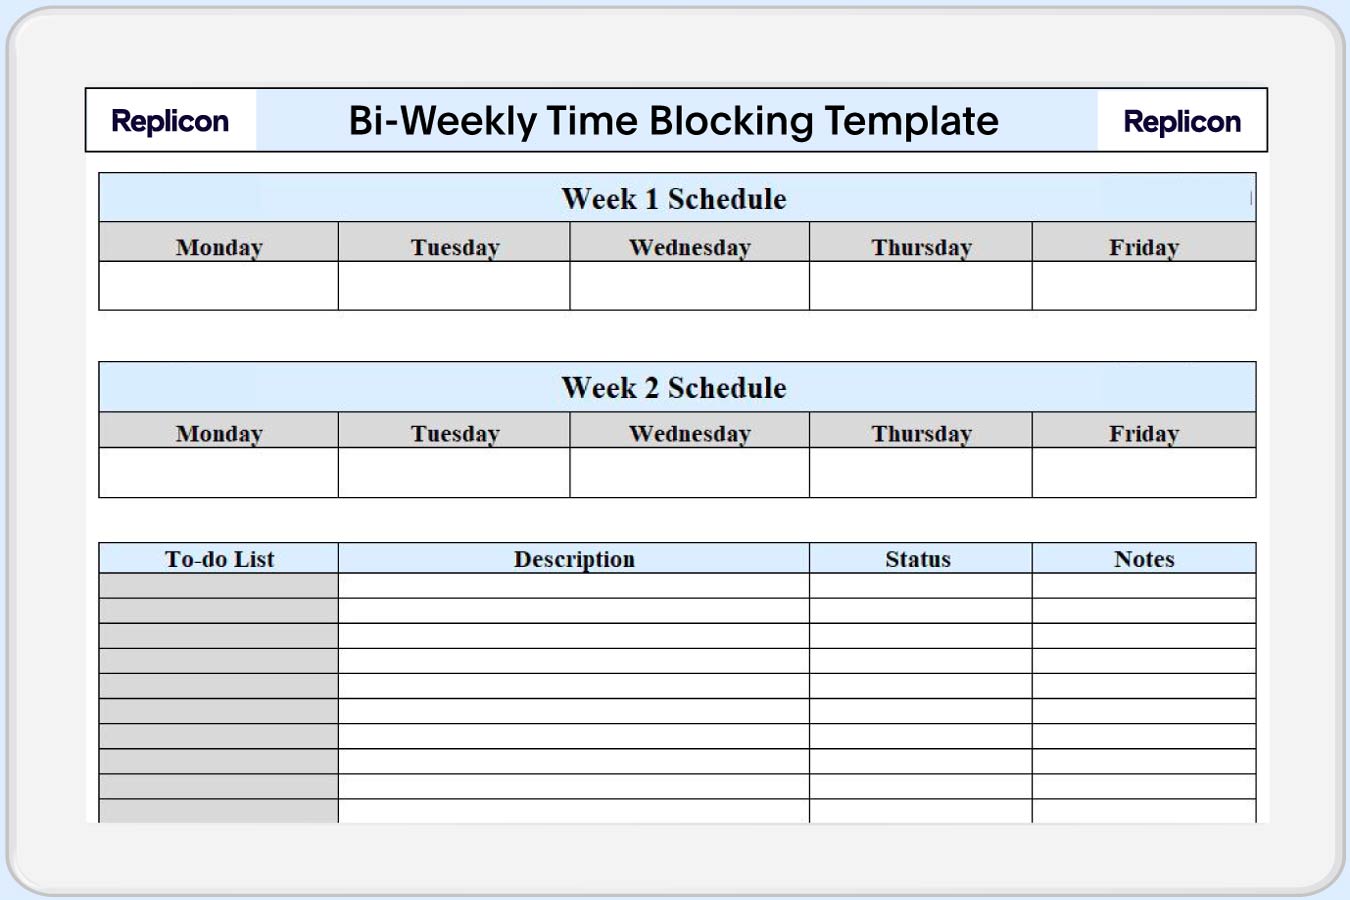 a preview of bi-weekly time blocking template from Replicon